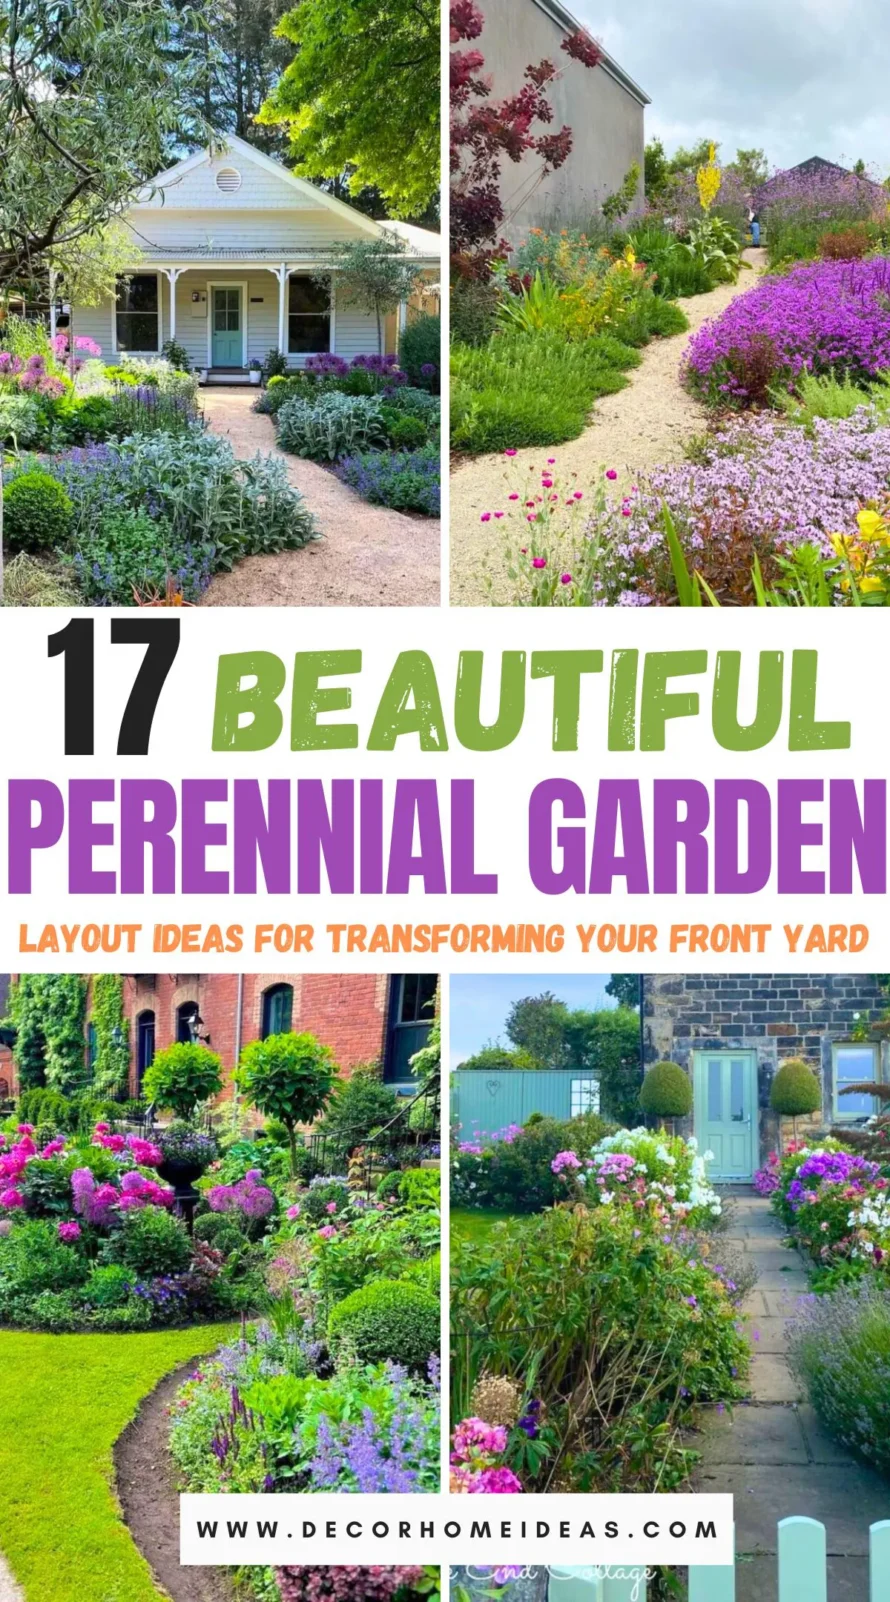 Discover 17 stunning perennial garden layout ideas that will transform your front yard into a blooming paradise. From vibrant color schemes to creative plant combinations, these designs ensure year-round beauty and minimal maintenance. Dive into these inspiring layouts and learn how to create a captivating garden that will be the envy of your neighborhood.